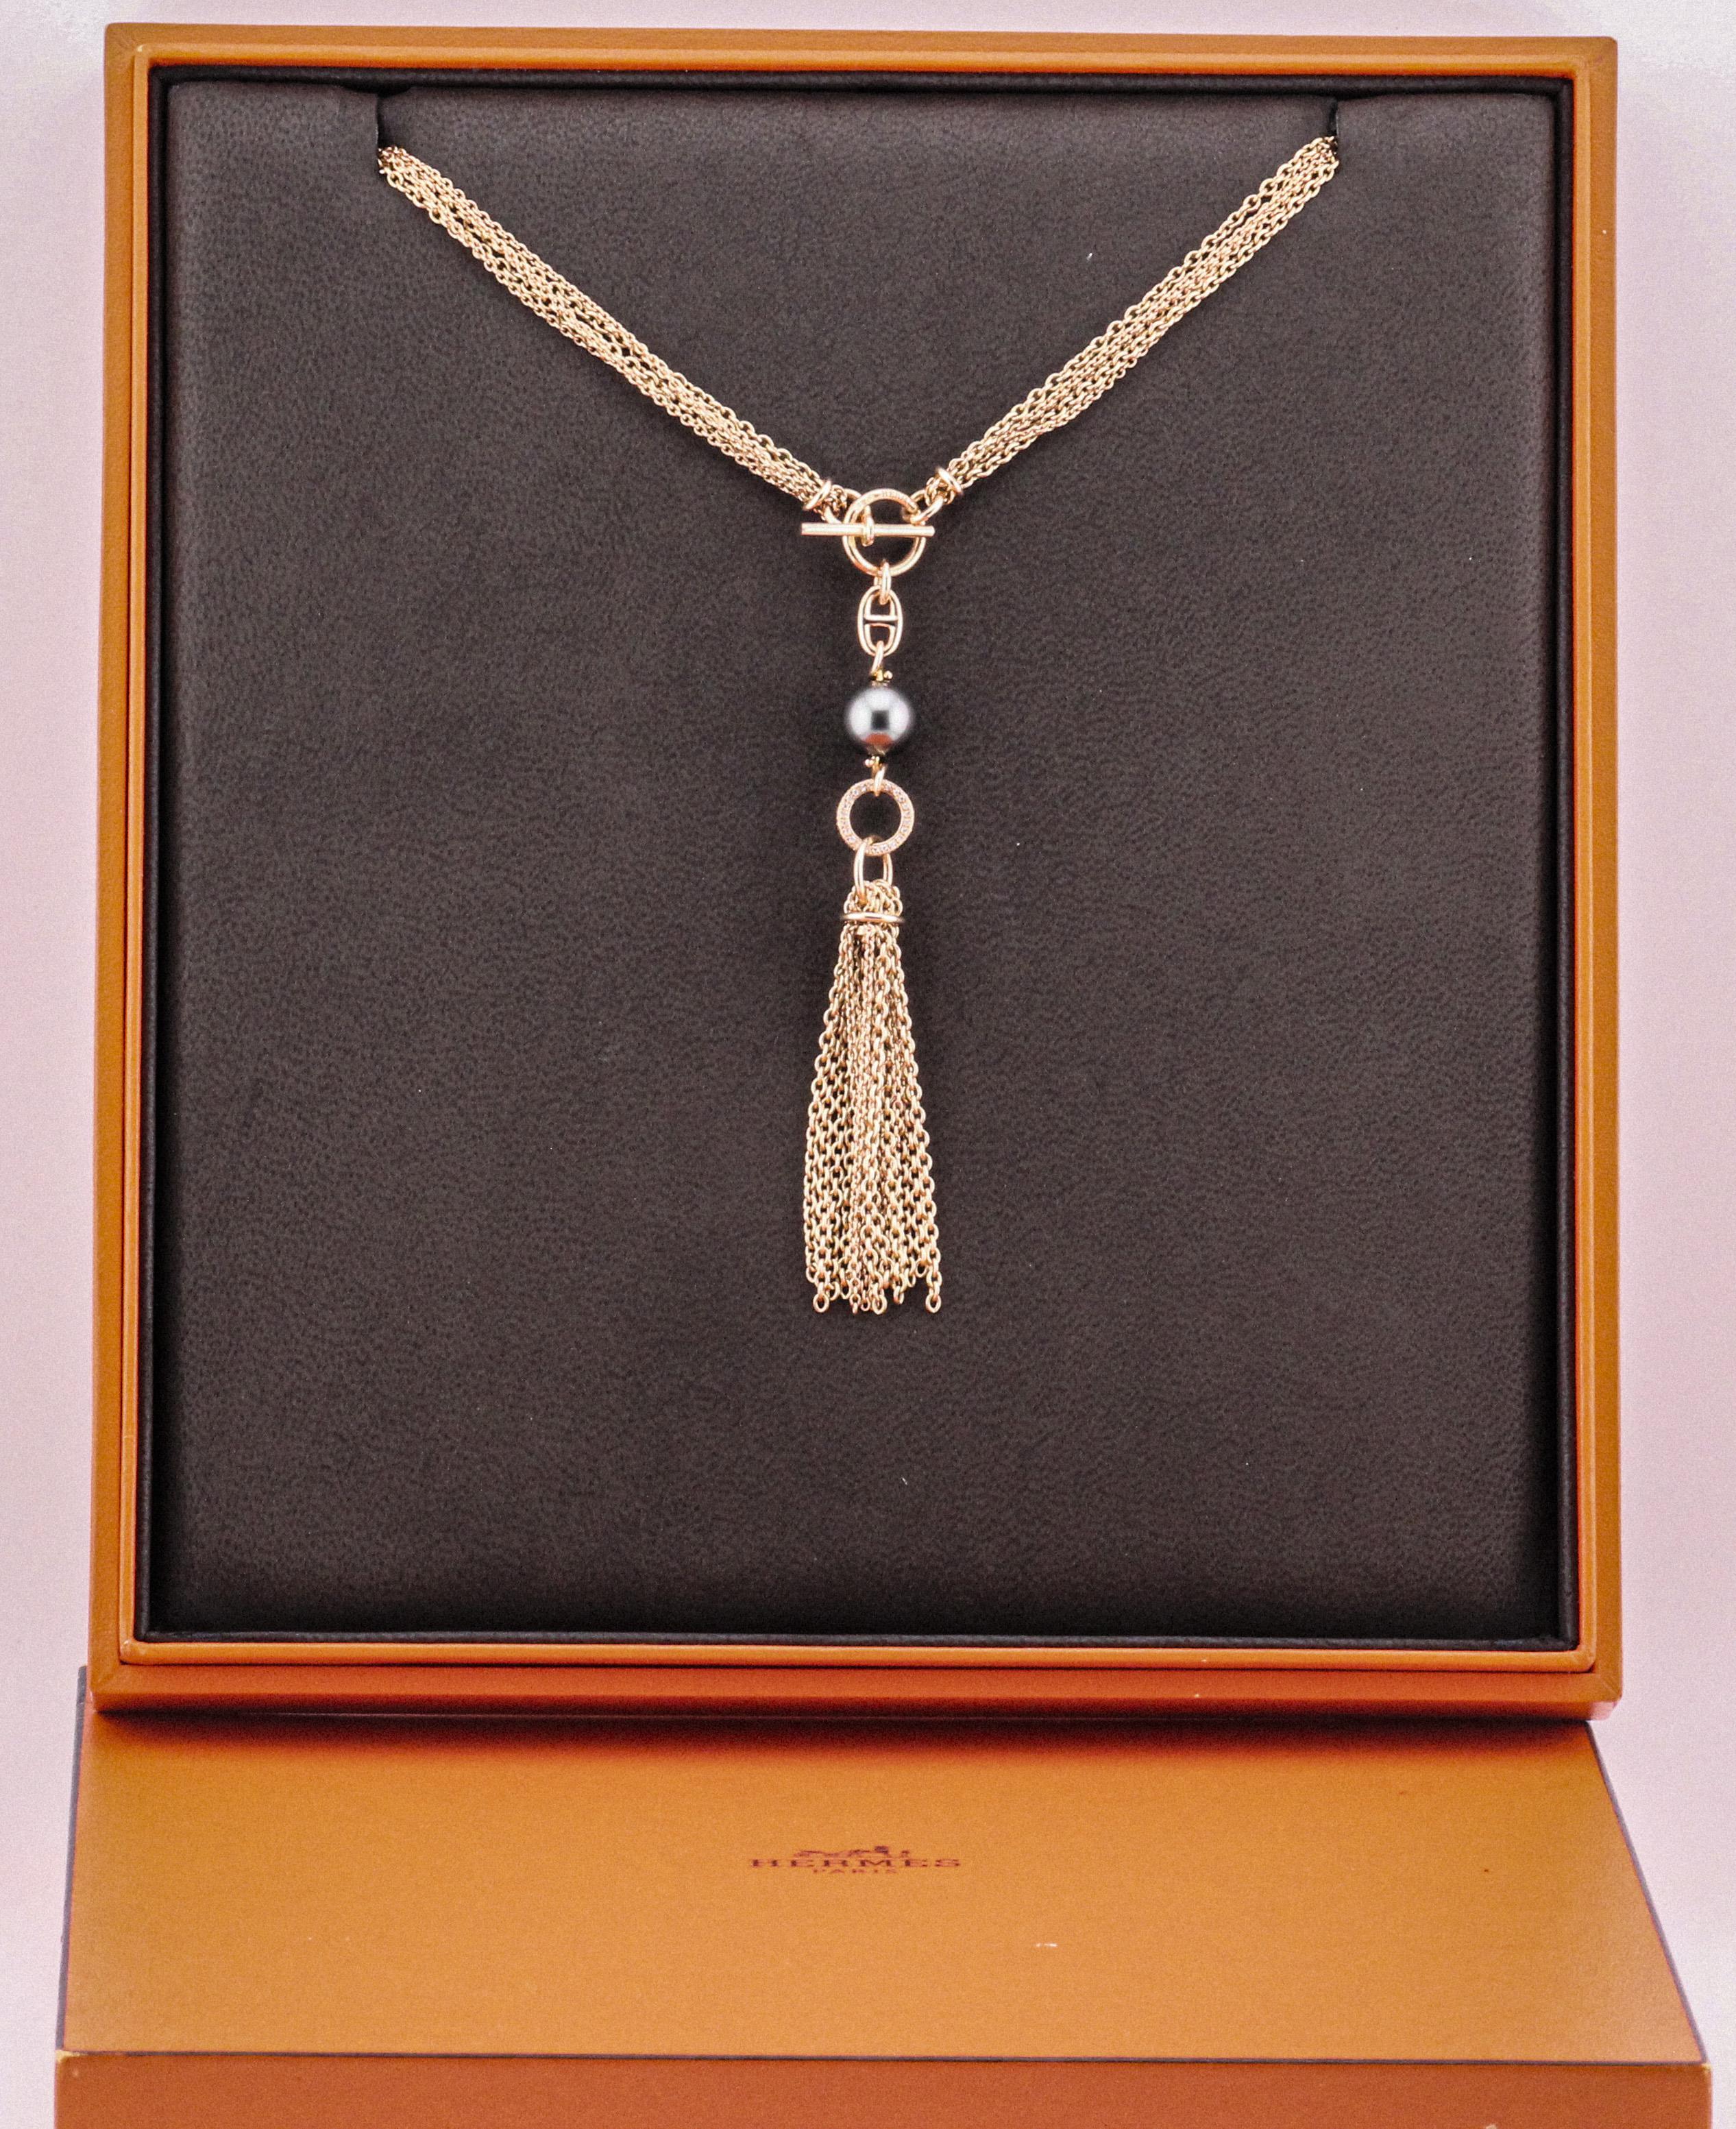 Hermes Chaine D'Ancre Black Pearl Diamond 18k Rose Gold Sautoir Tassel Necklace In Good Condition For Sale In Bellmore, NY